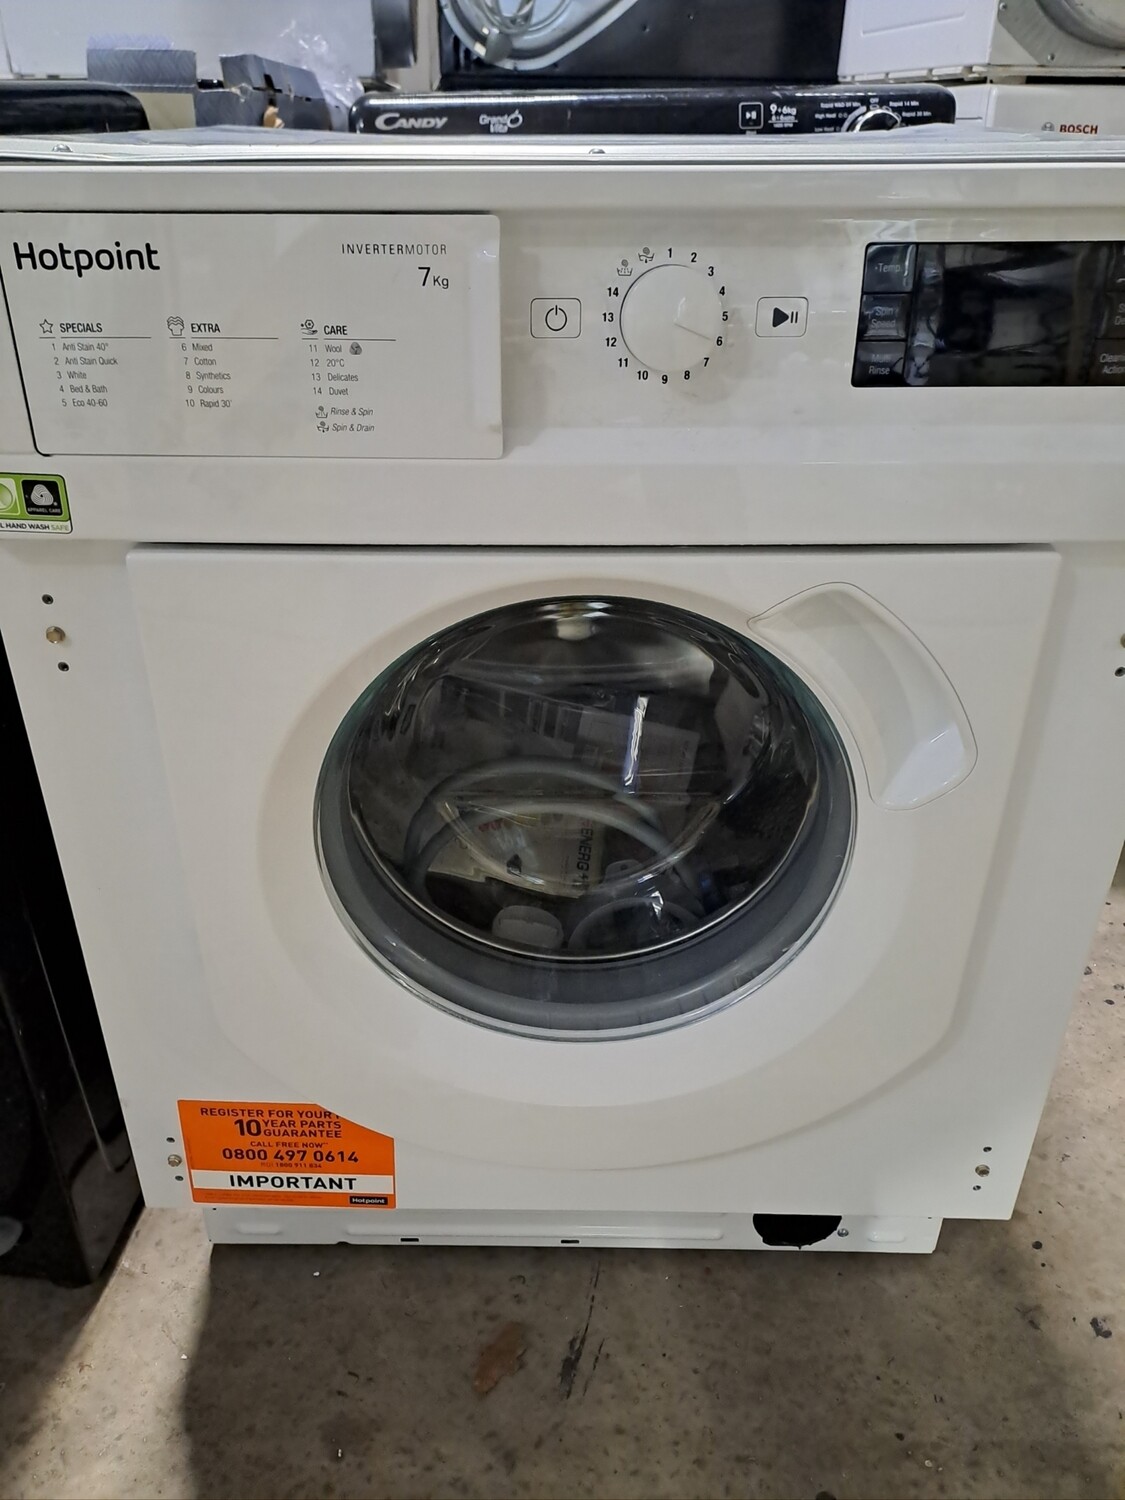 Hotpoint BIWMHG71483UKN Built in Integrated Washing Machine New 12 Month Guarantee + 10 Year Parts